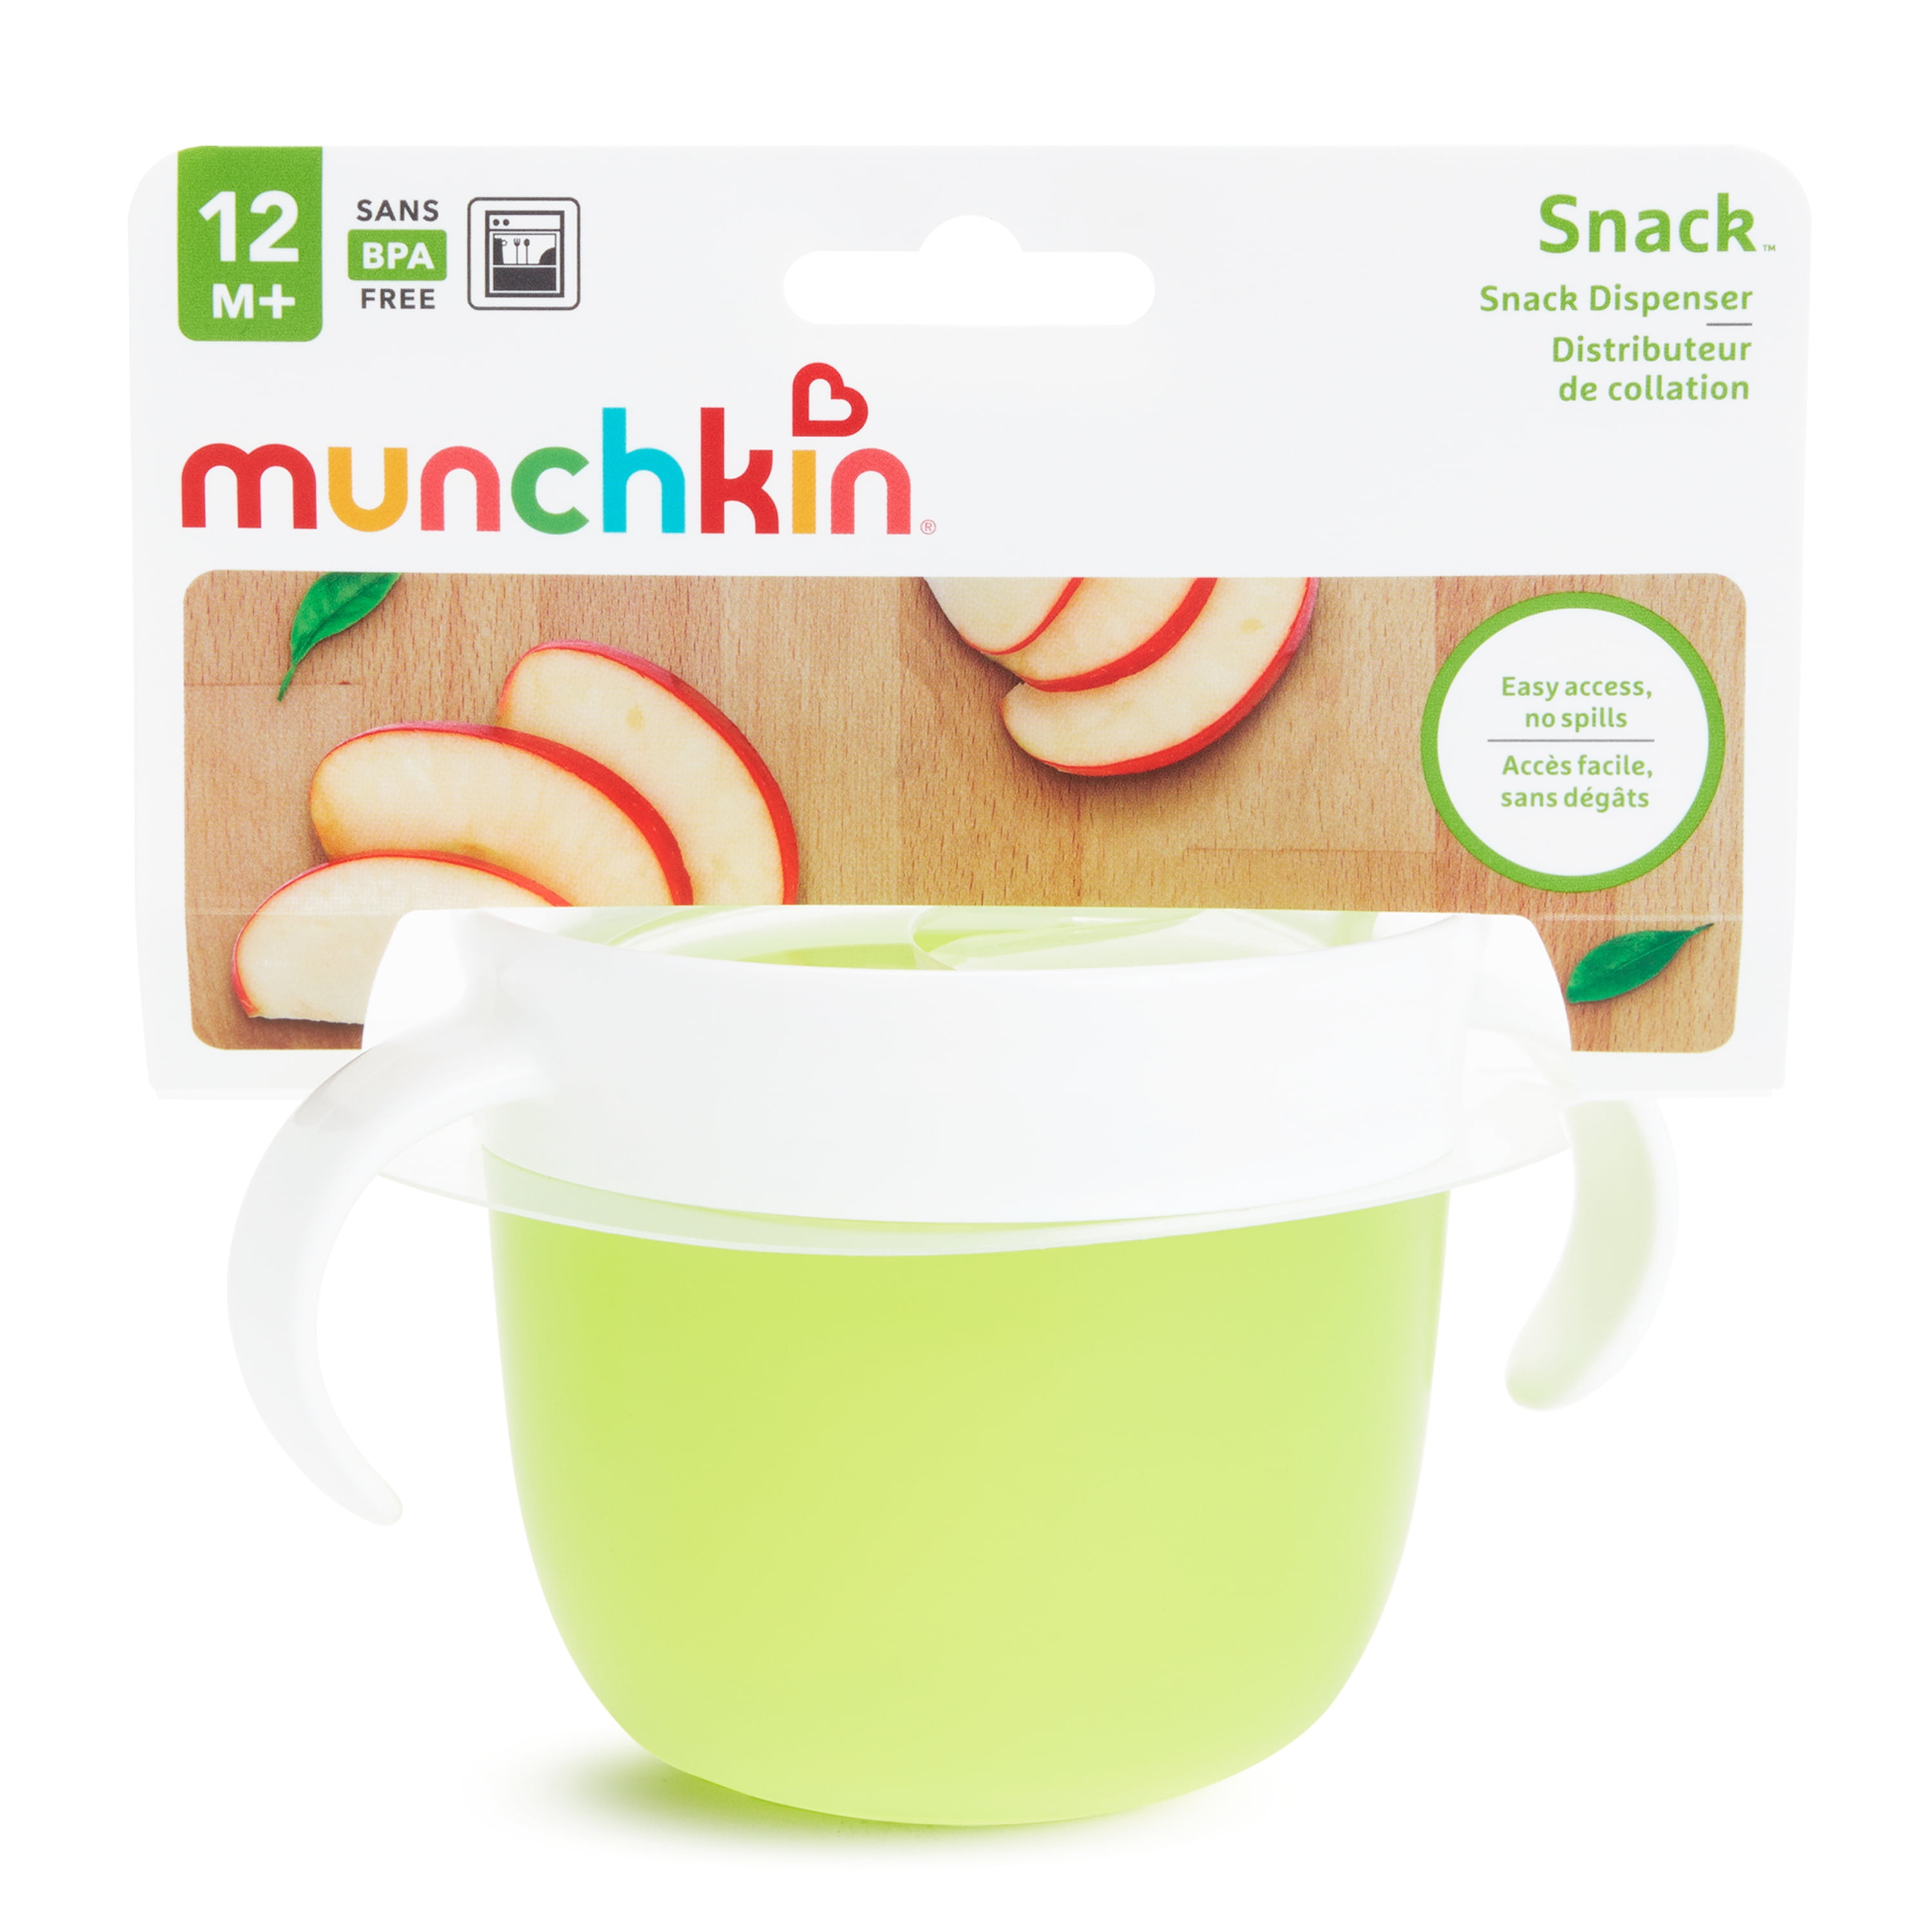 Munchkin® Snack Catcher® Snack Containers - Blue/Green, 2 pk - Kroger